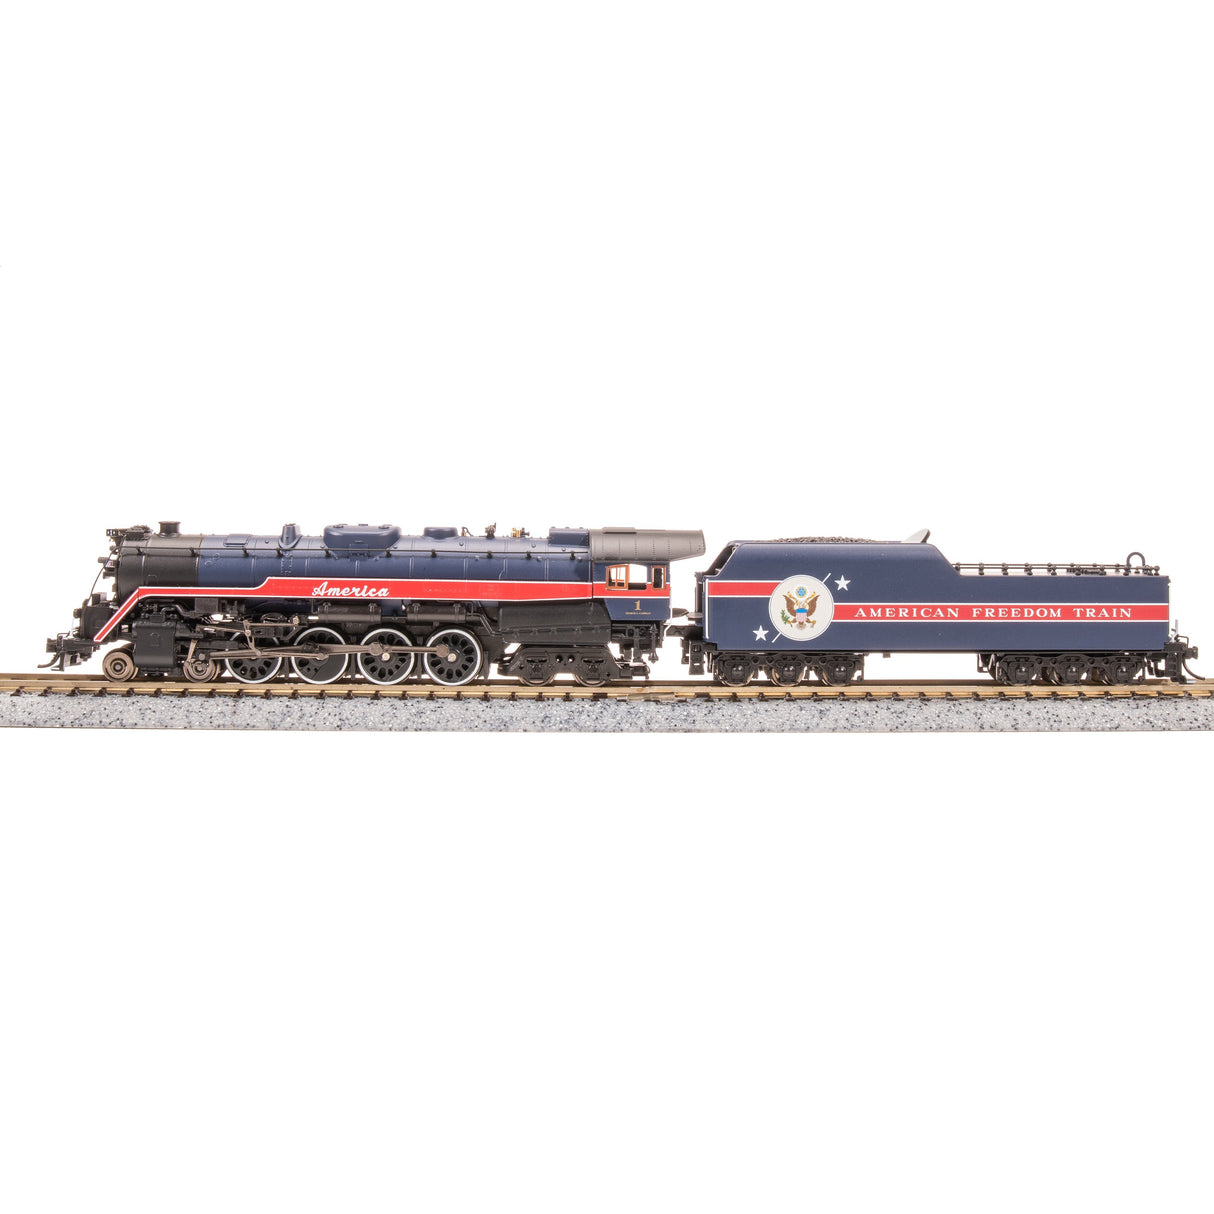 Broadway Limited N Scale Reading T-1 4-8-4 Steam Locomotive 1976 Freedom Train #1 DC/DCC S